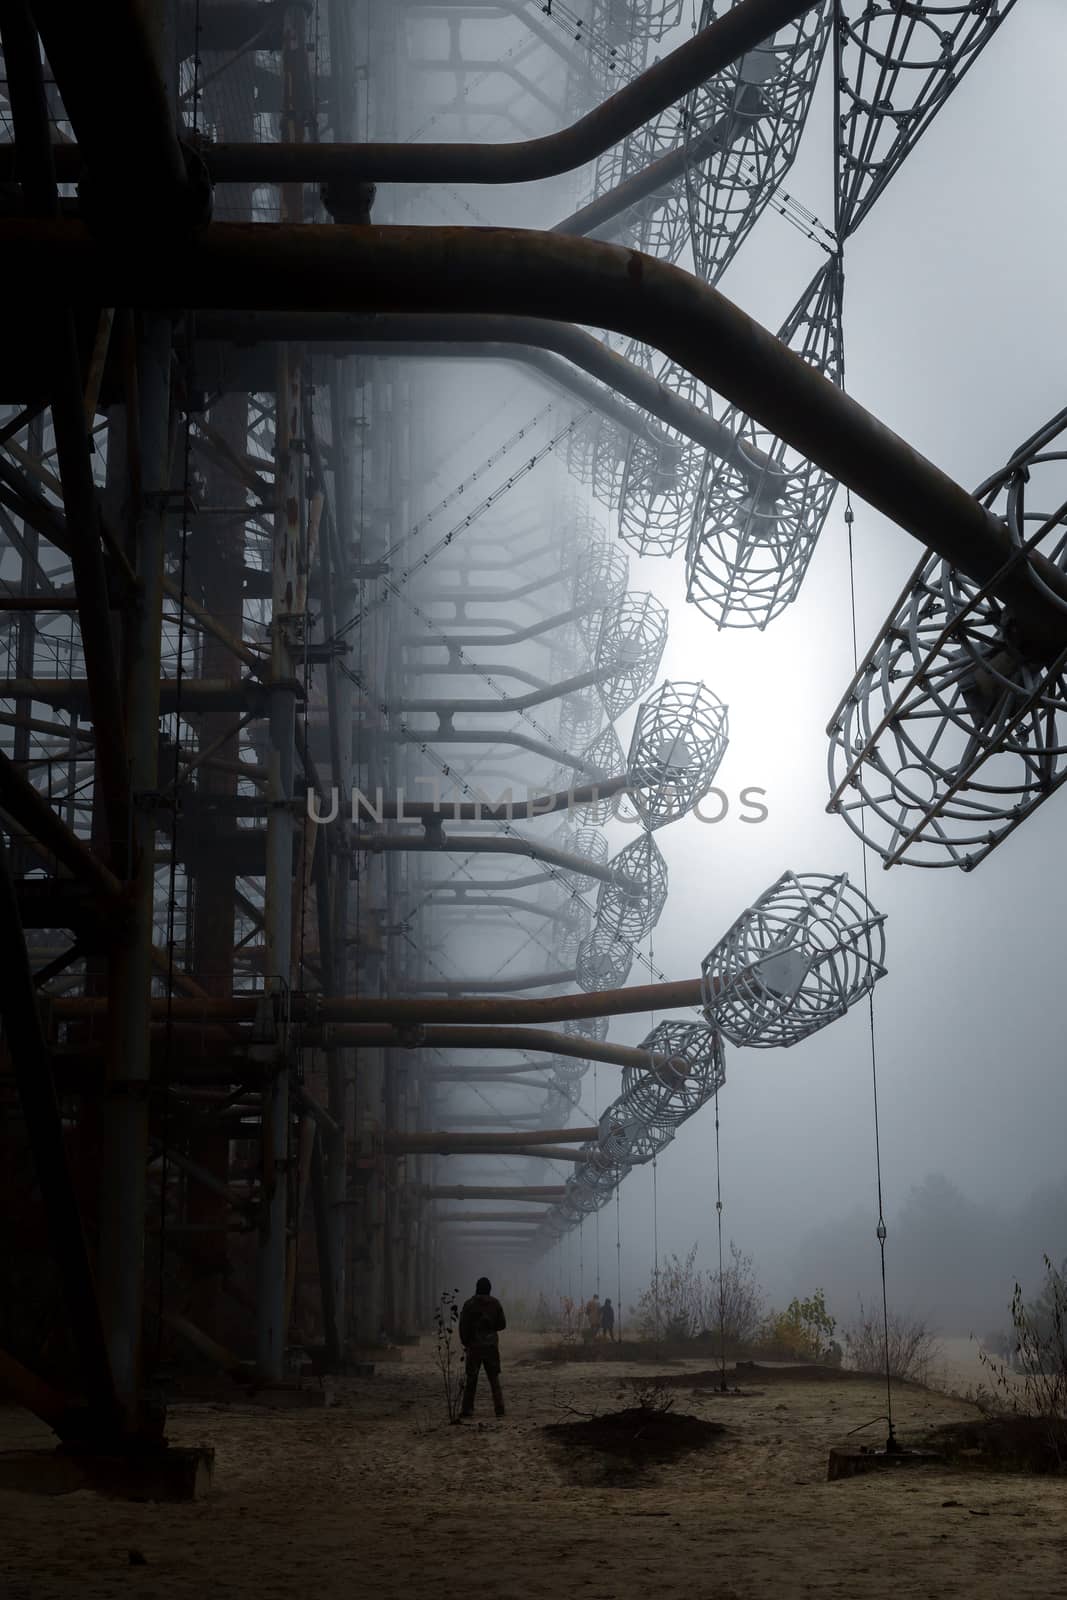 Duga Antenna Complex in Chernobyl Exclusion zone 2019 by svedoliver